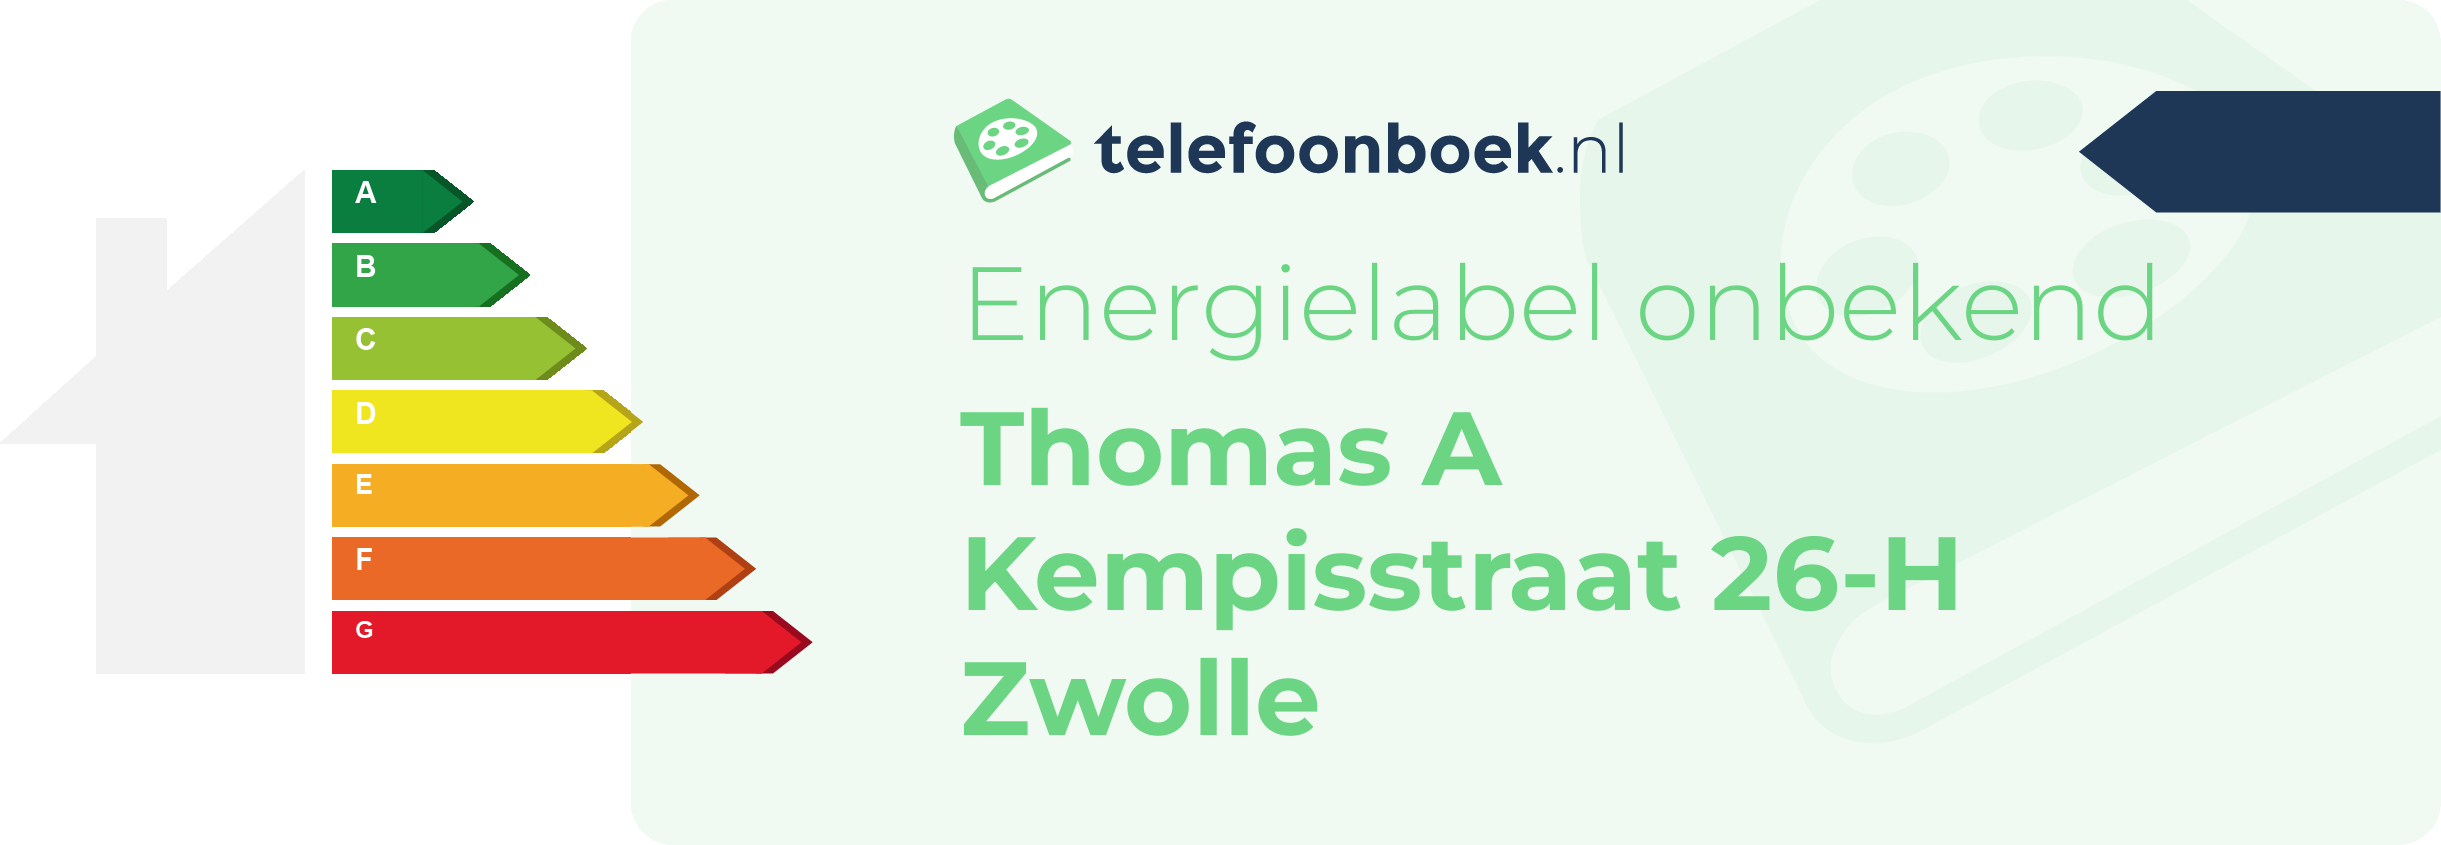 Energielabel Thomas A Kempisstraat 26-H Zwolle